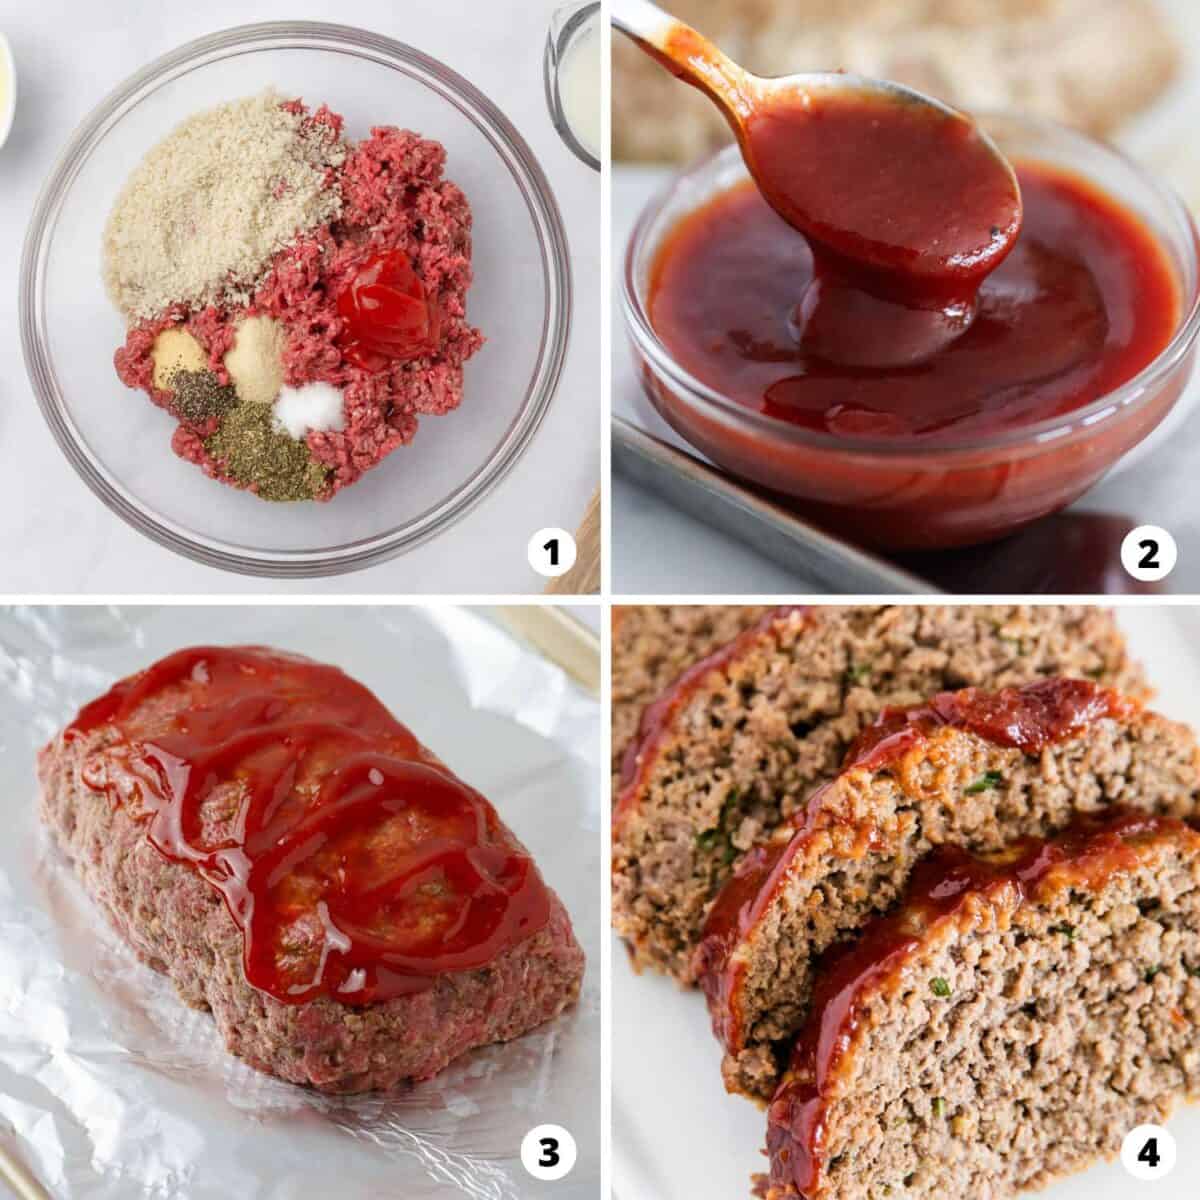 Showing how to make meatloaf in a 4 step collage.